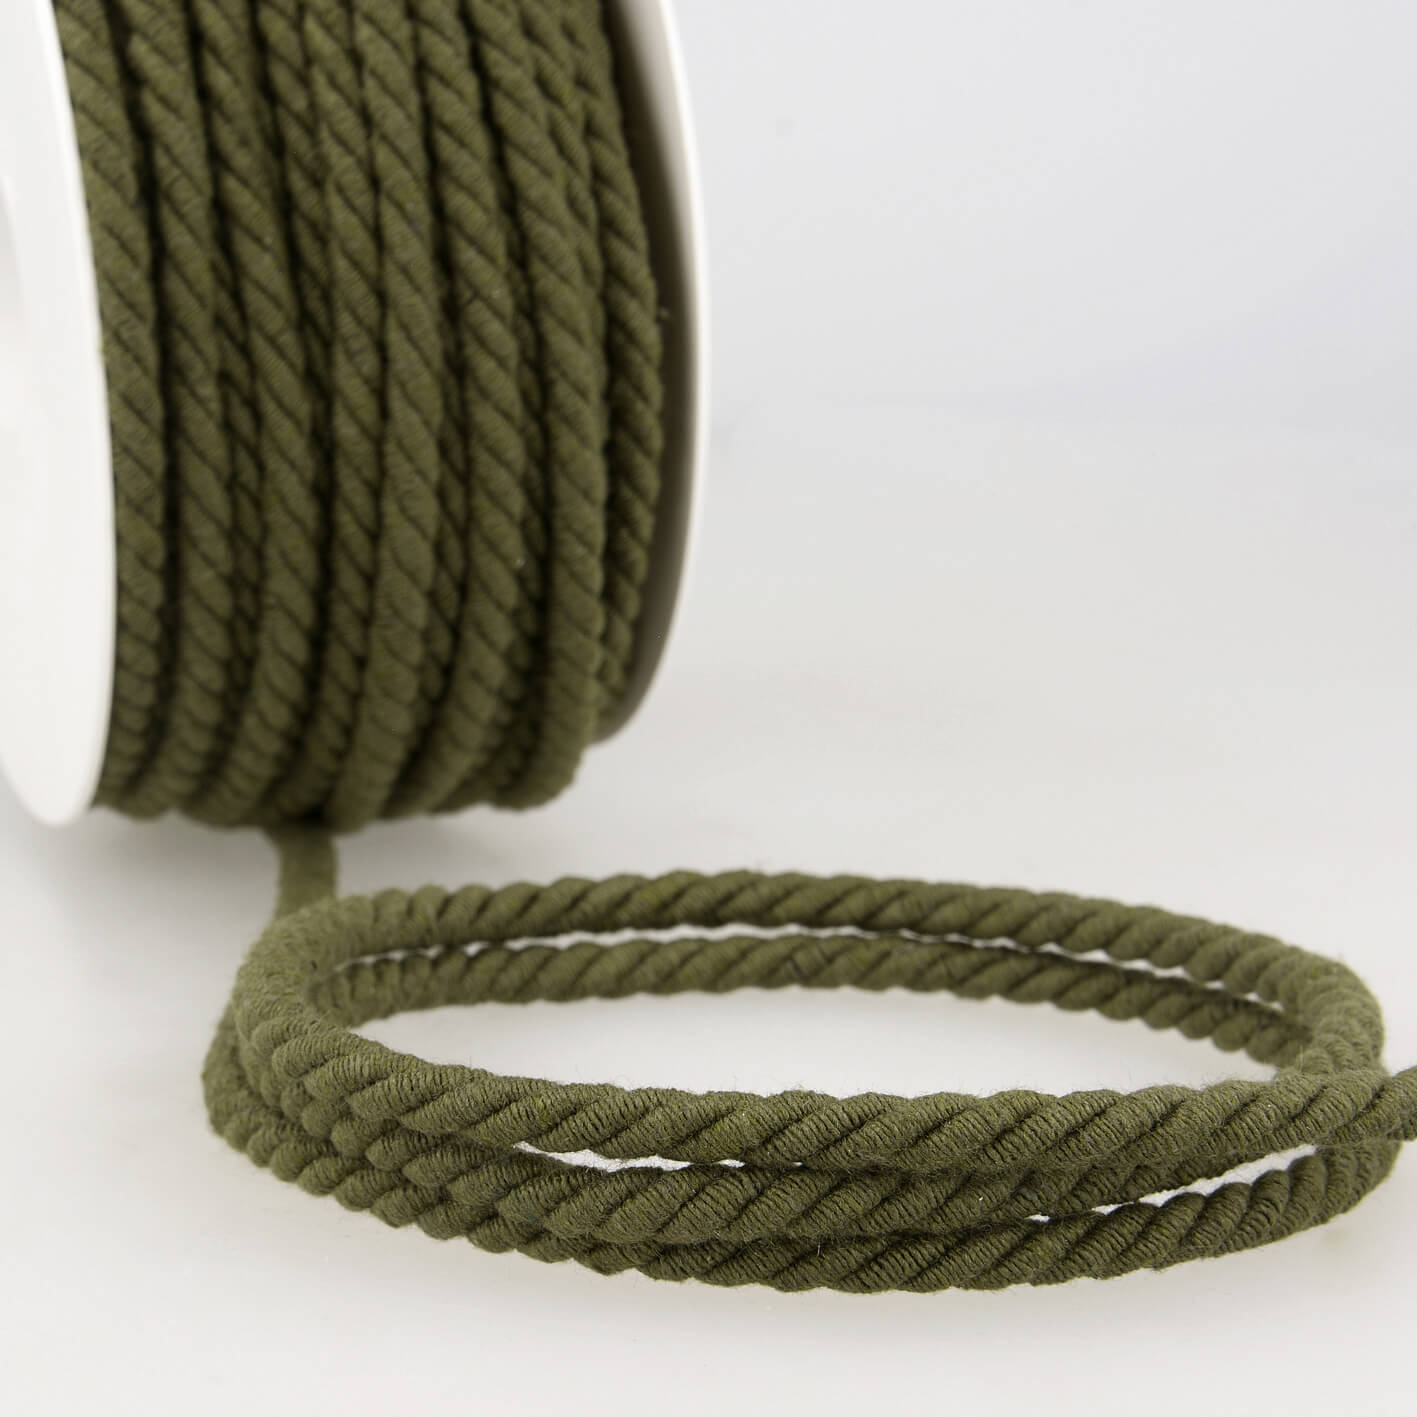 Khaki Piping Cord by Sephanoise  - 5mm wide